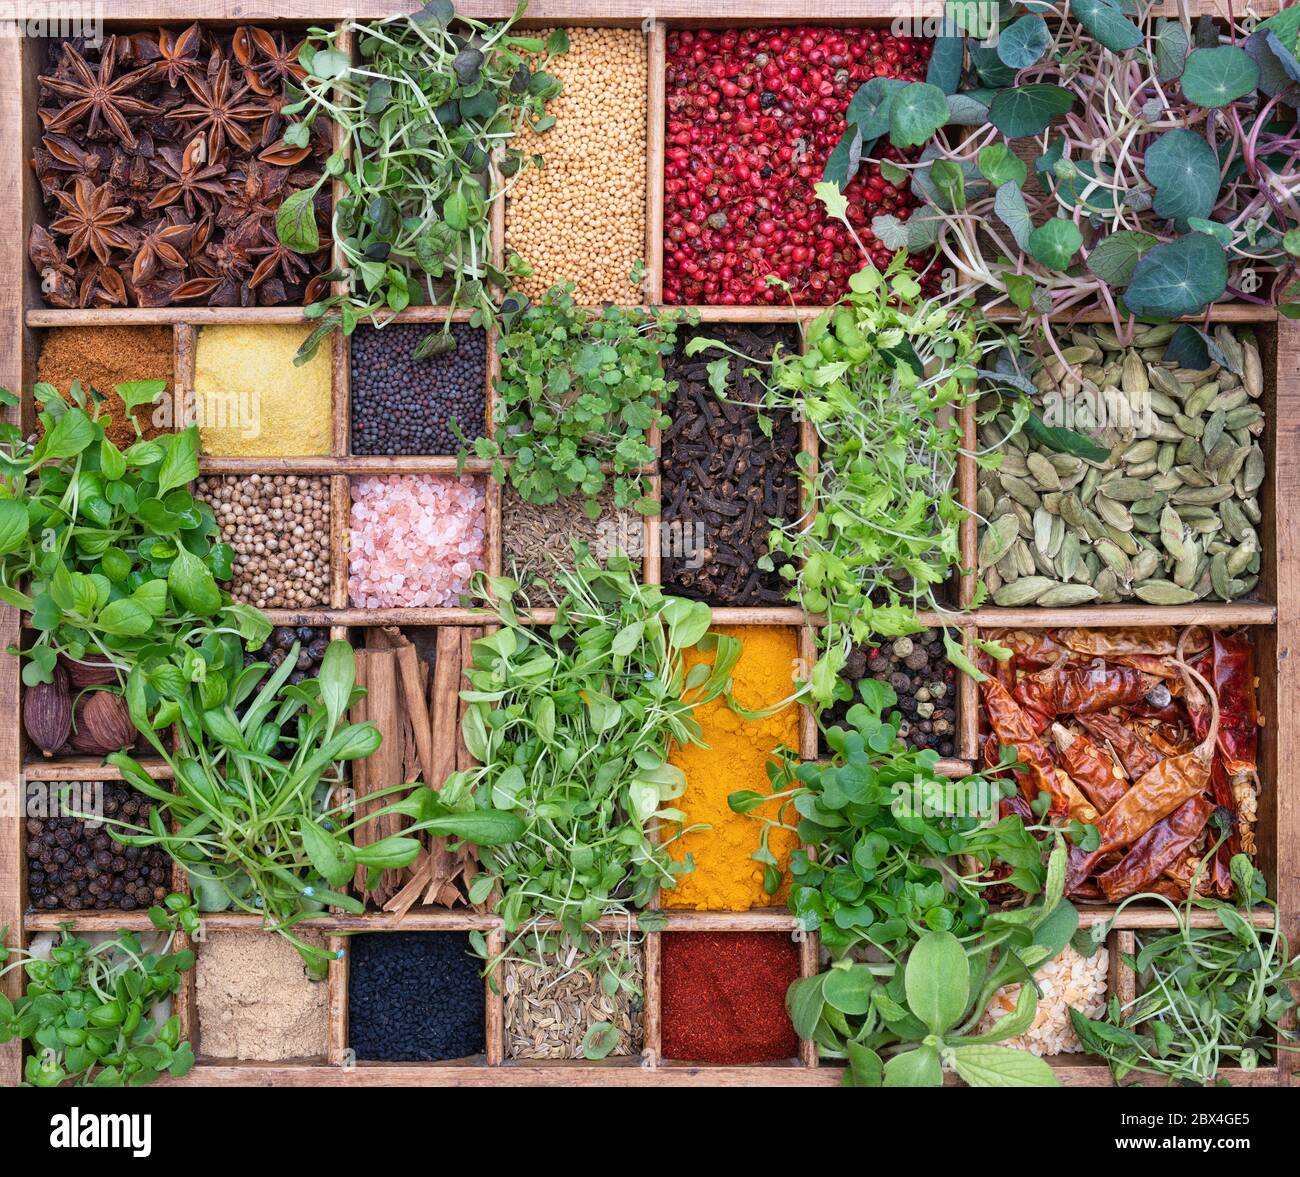 Microgreens and Spices. Hydroponically grown herbs, salads and edible flowers and various spices in a wooden tray Stock Photo